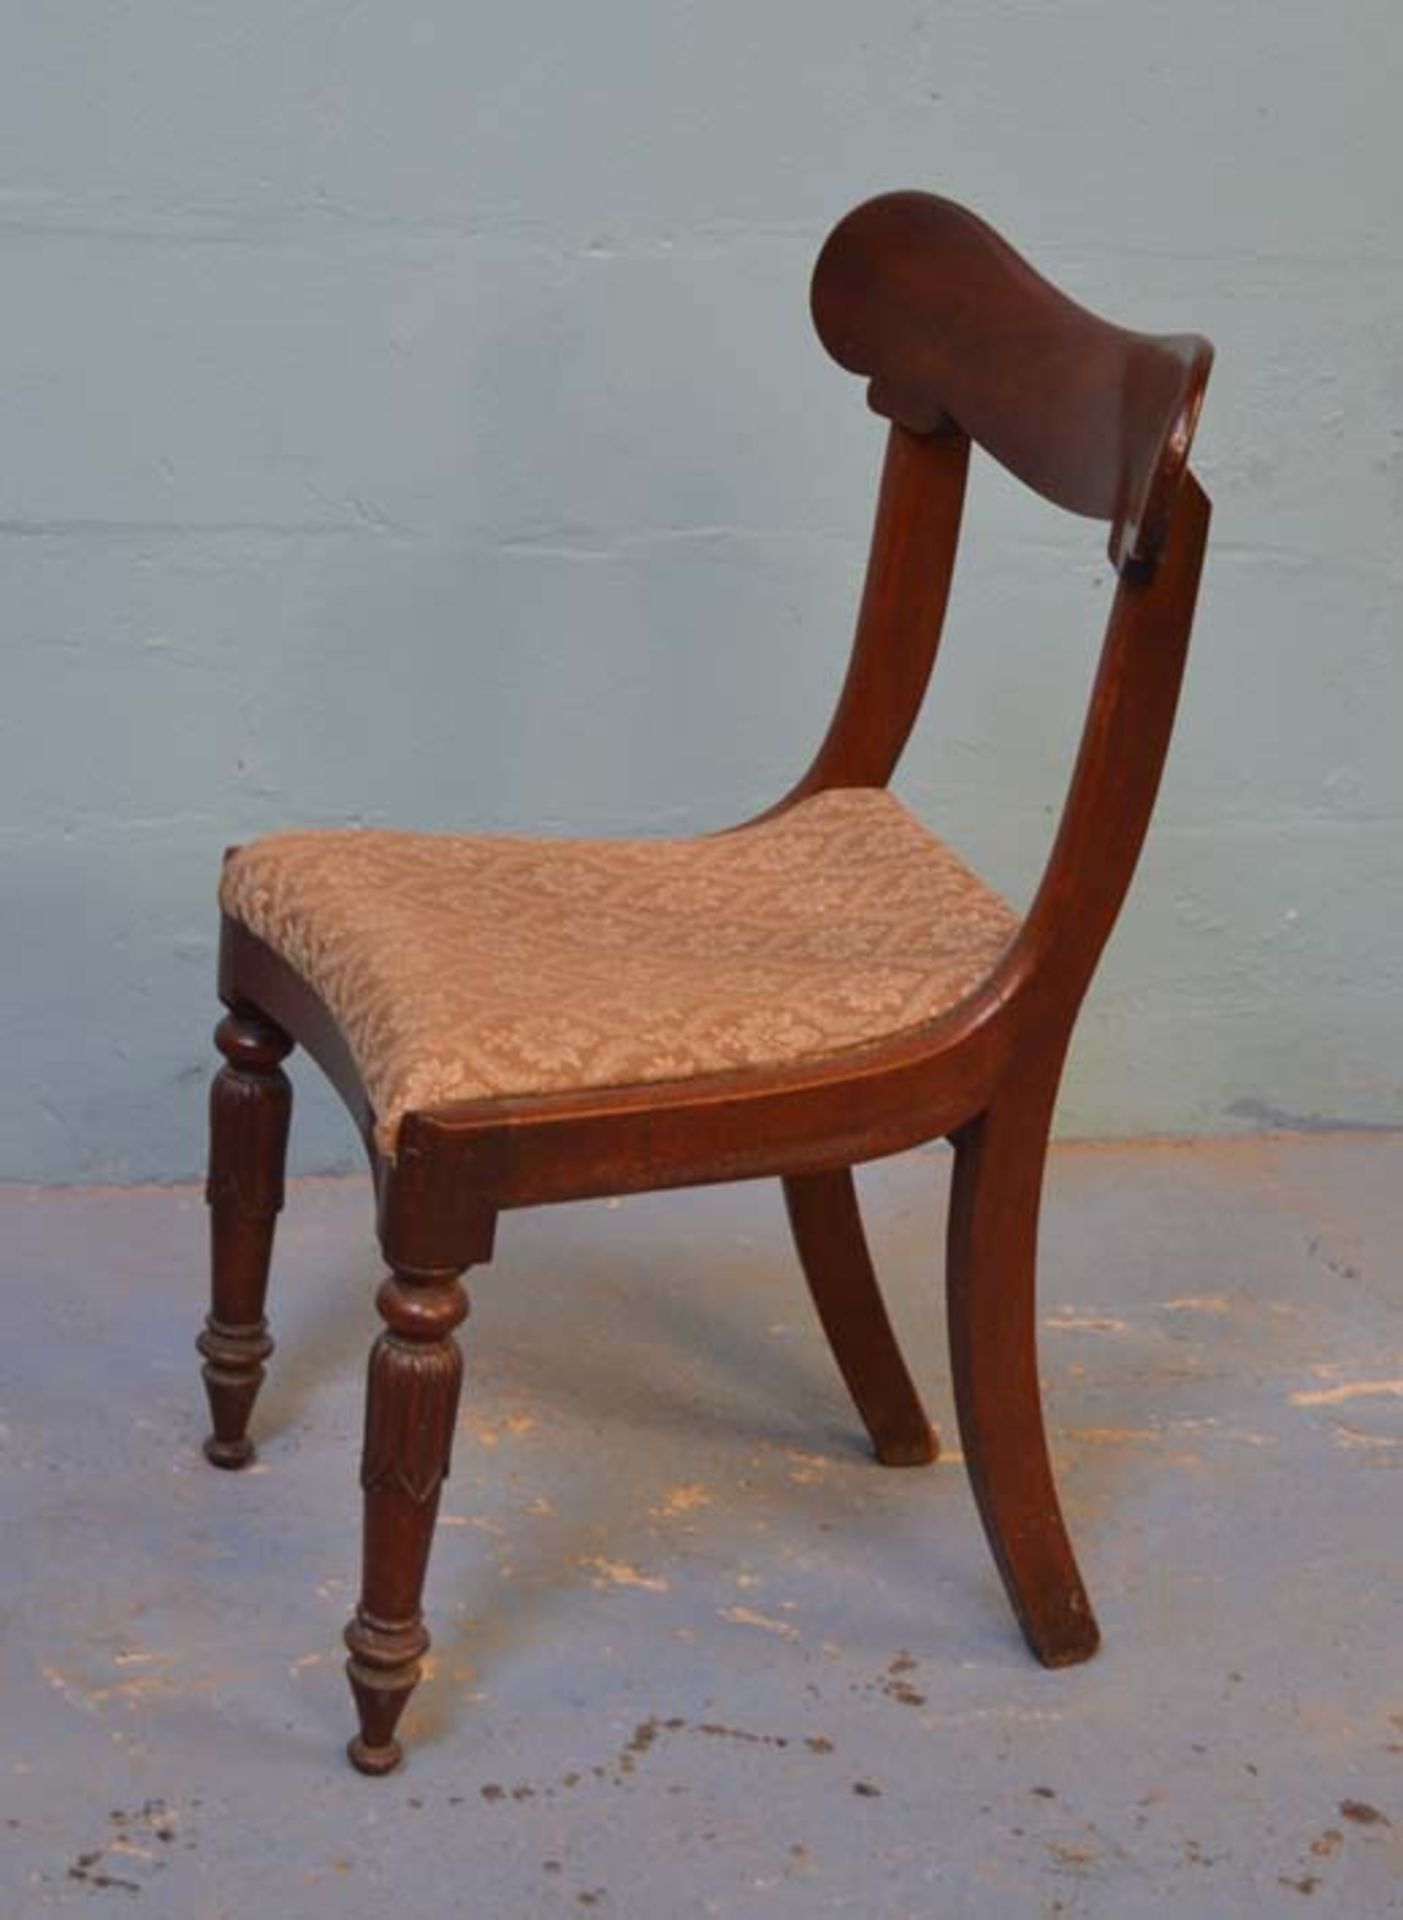 *PAIR OF EARLY VICTORIAN MAHOGANY ANTIQUE CHAIRS. 880MM ( 34.75" ) HIGH X 520MM ( 20.5" ) WIDE X - Image 4 of 5